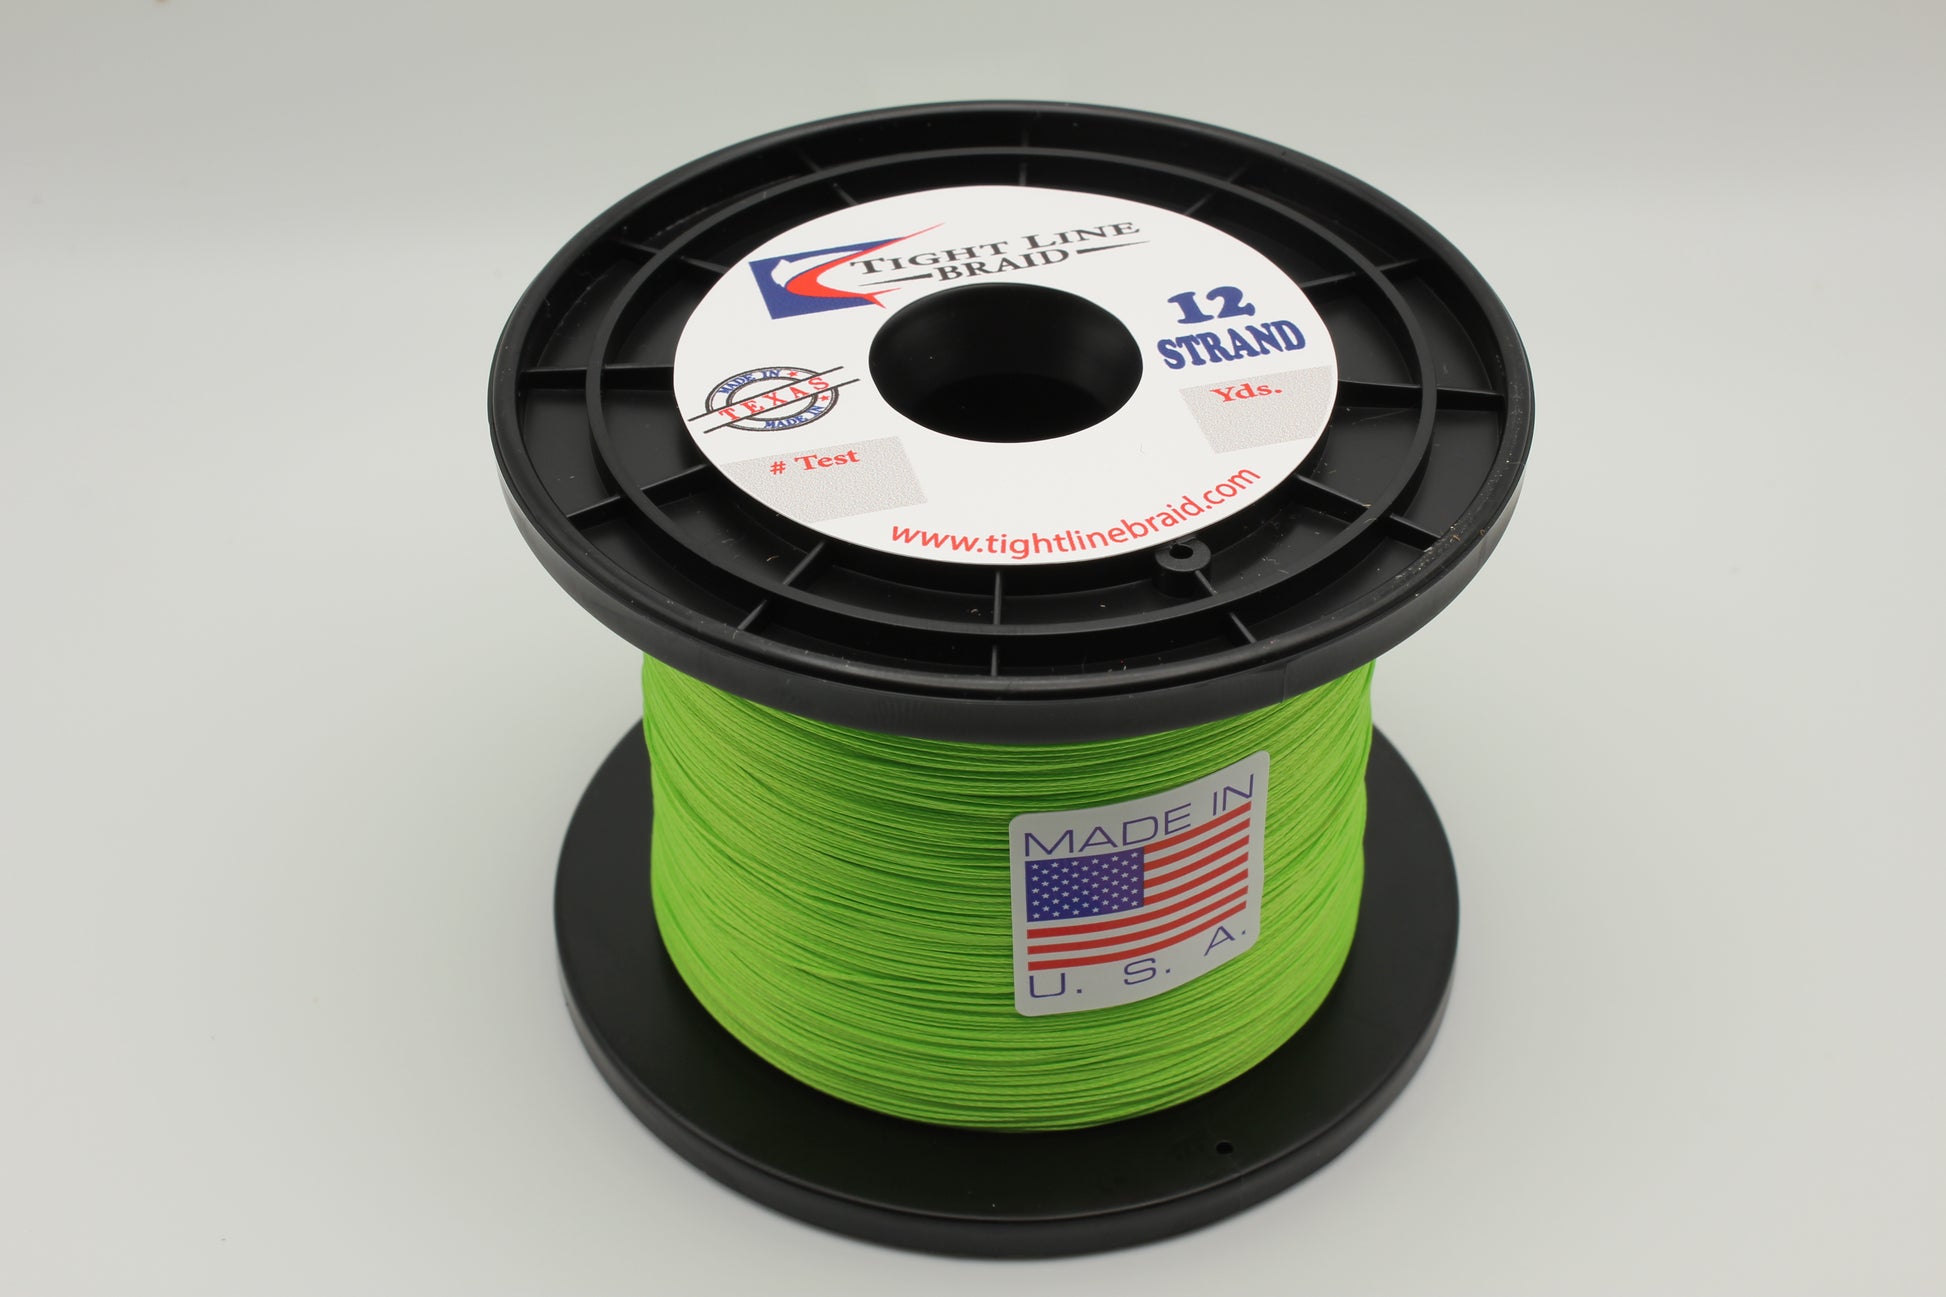 300m Ashconfish Braided Hollow Core Line for Big Game Fishing Boat